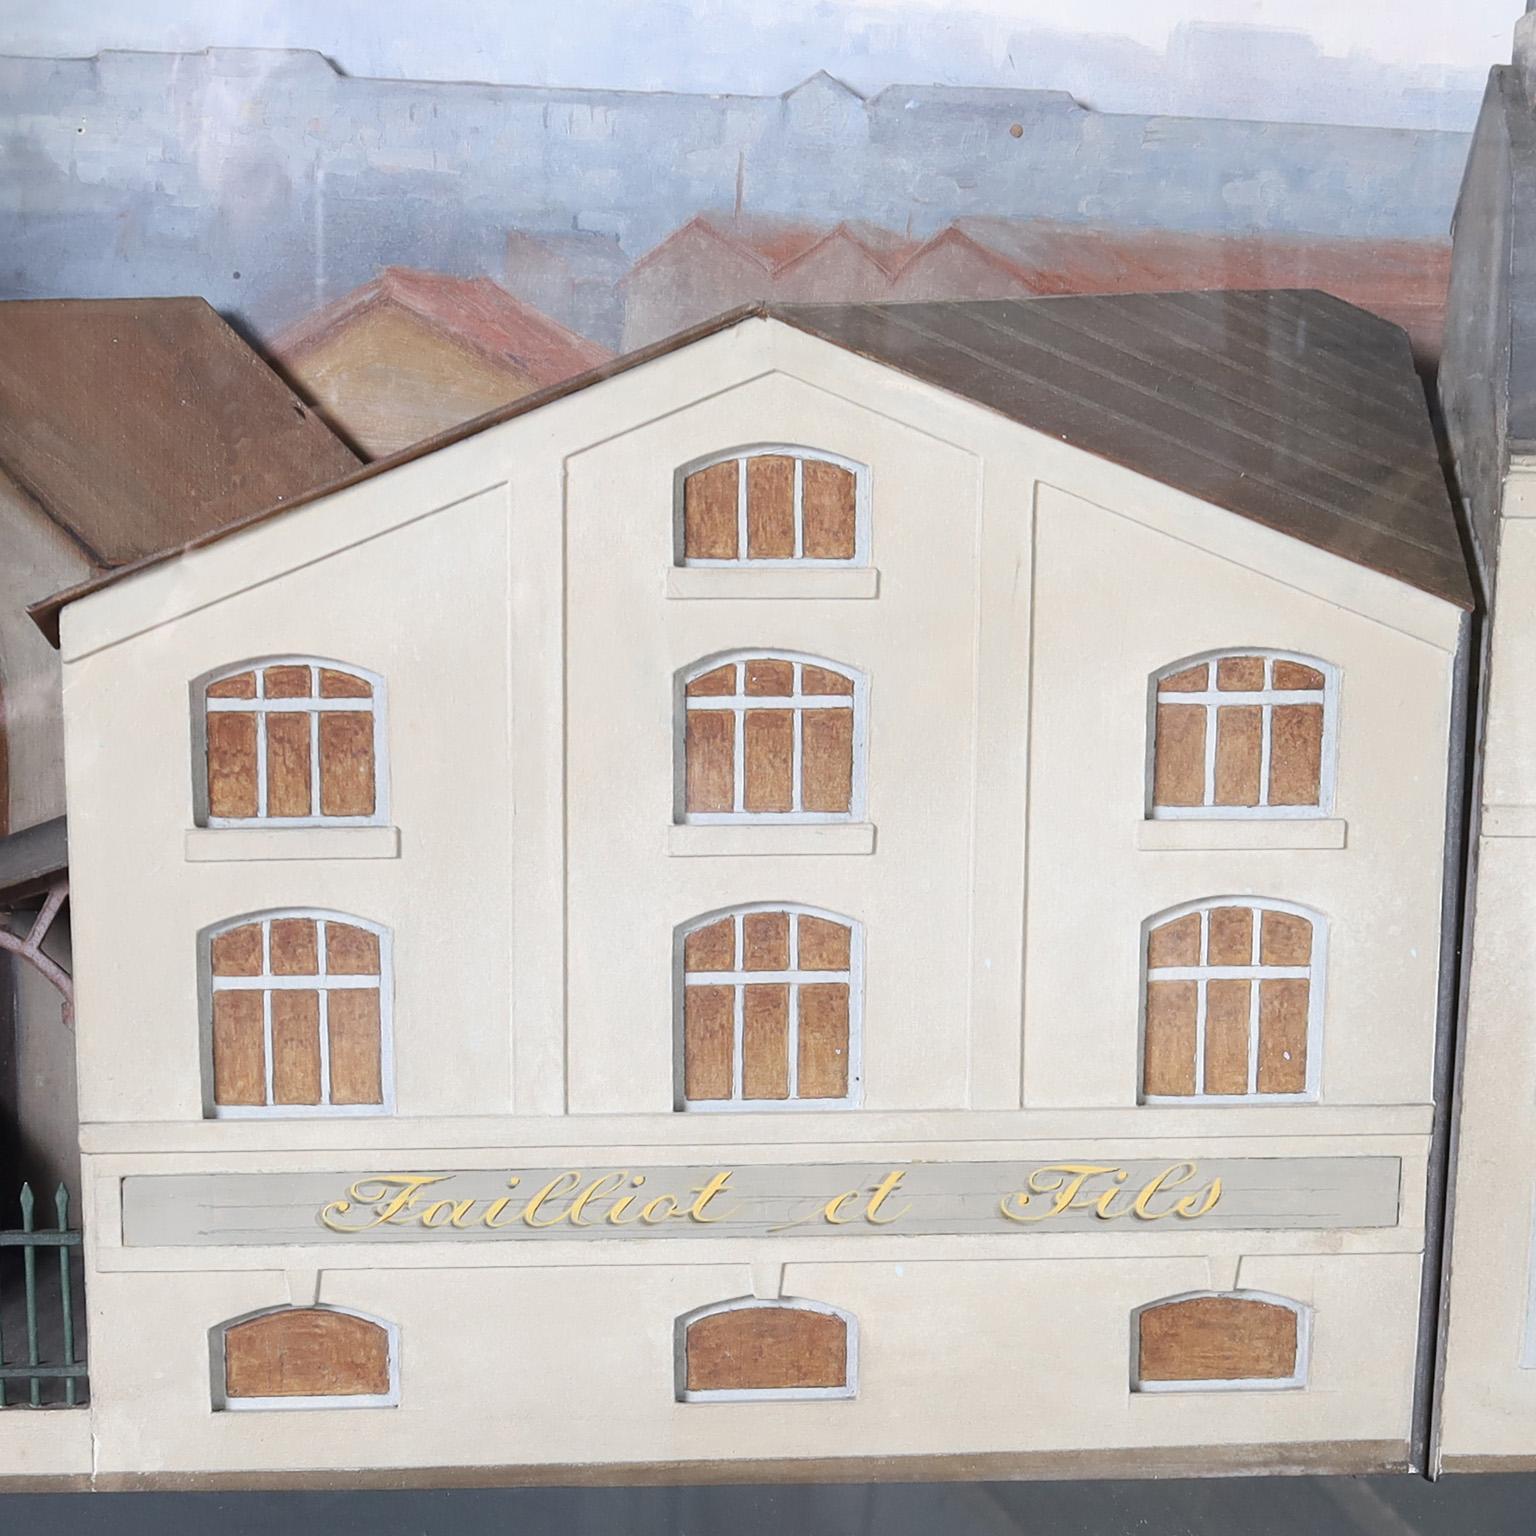 Rare and unusual antique diorama of a street in a neighborhood, in a city capturing a time and a place for centuries to come. Crafted with metal and paper painted with striking accuracy. Presented in a mahogany frame under glass and signed P.